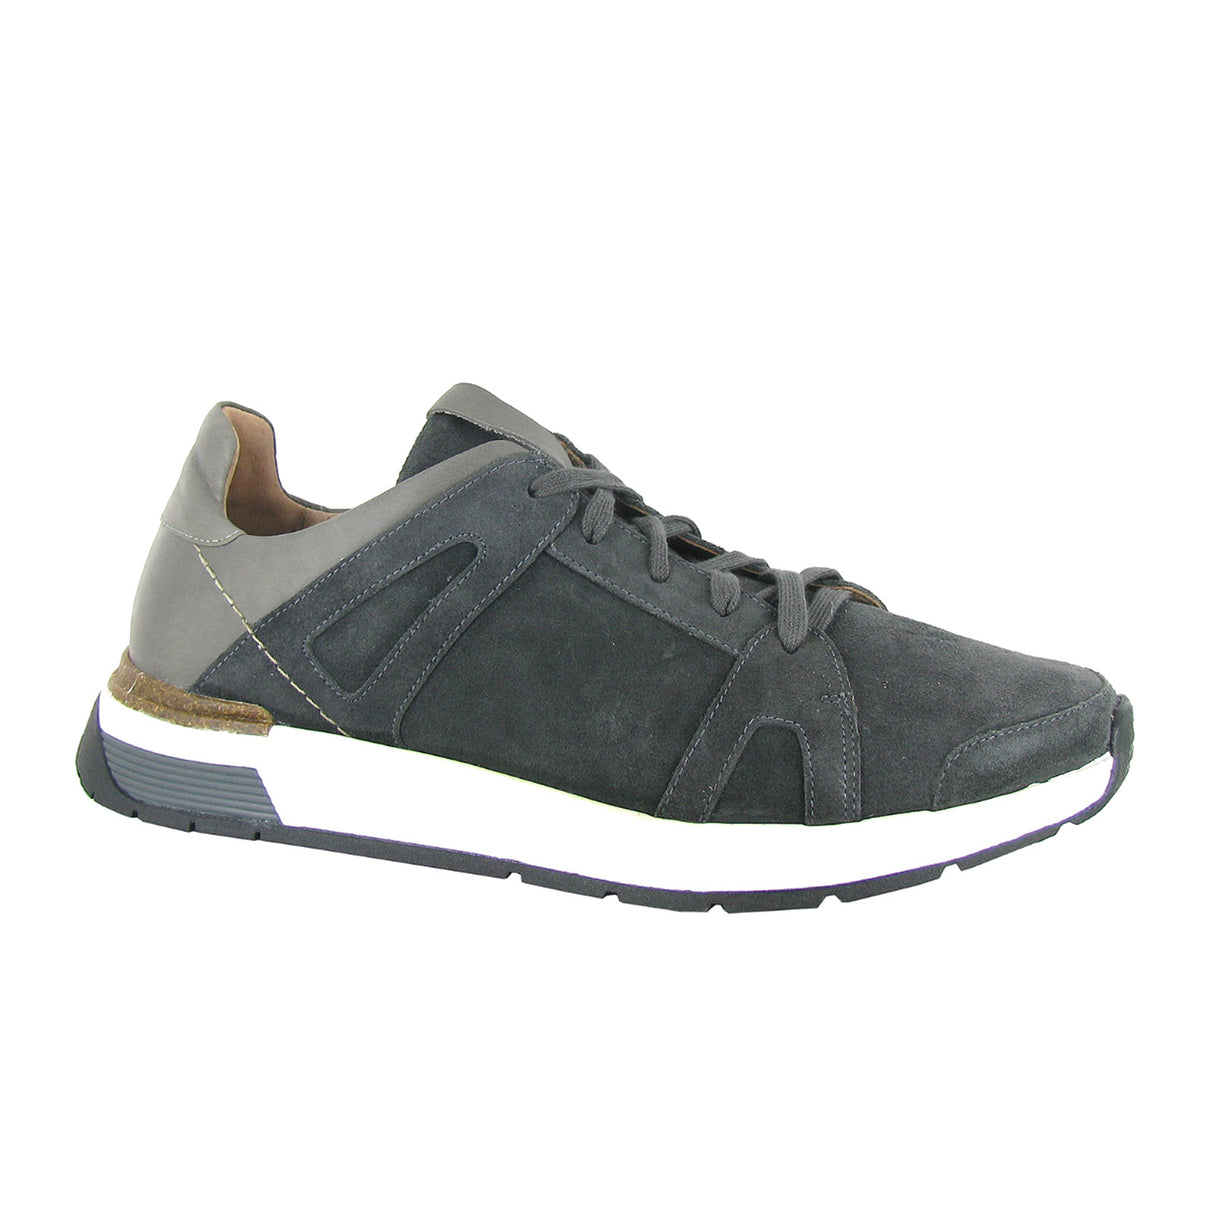 Naot Magnify Sneaker (Men) - Oily Midnight Suede/Foggy Gray Leather Dress-Casual - Sneakers - The Heel Shoe Fitters